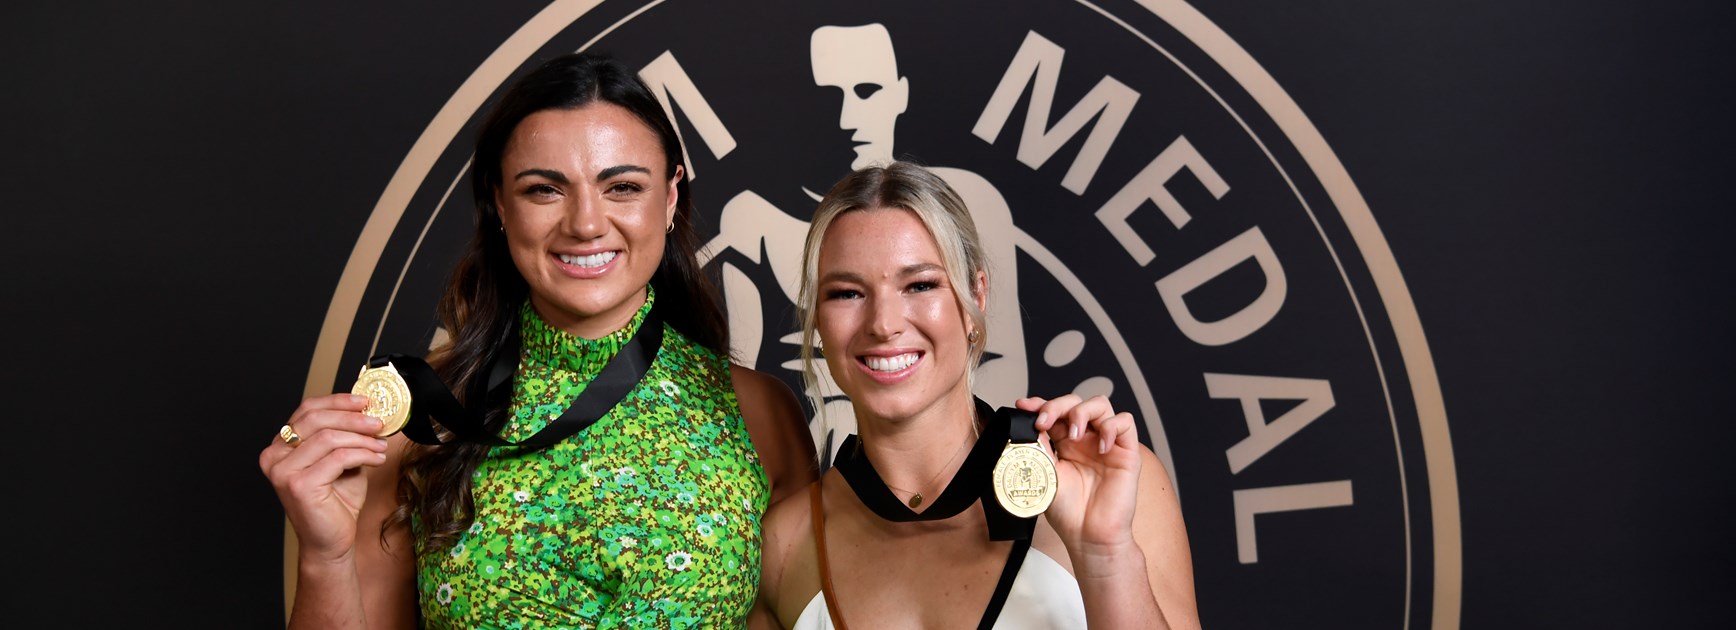 Historic first for Dally M female player of the year award